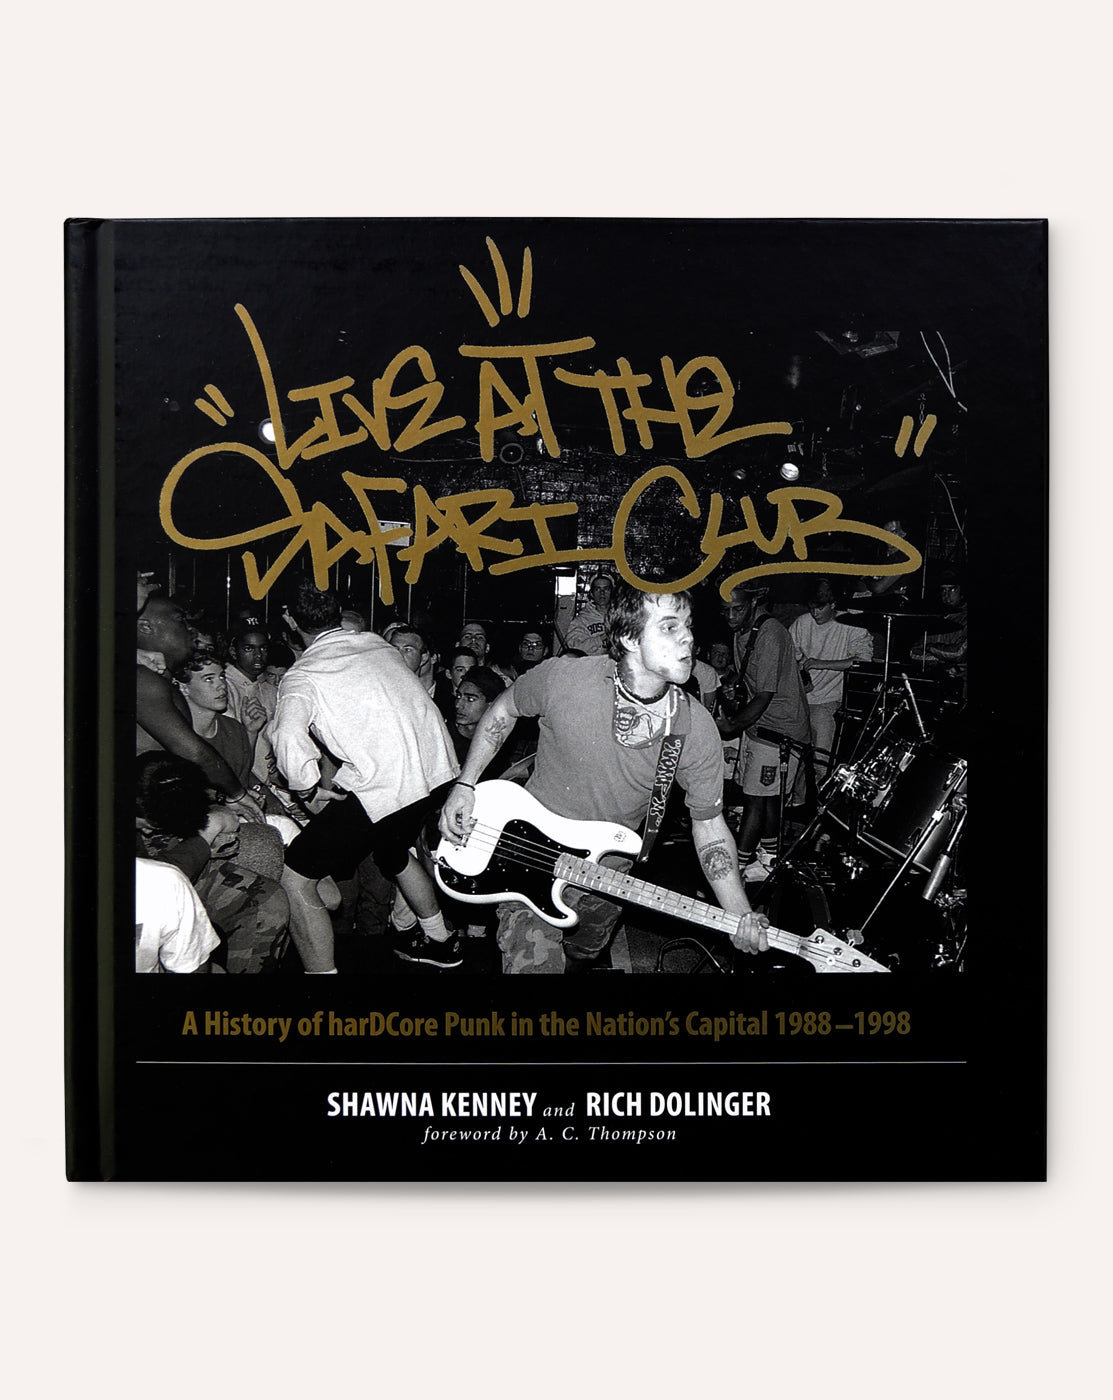 Live at the Safari Club: A History of harDCcore Punk in the Nation's Capital, 1988-1998